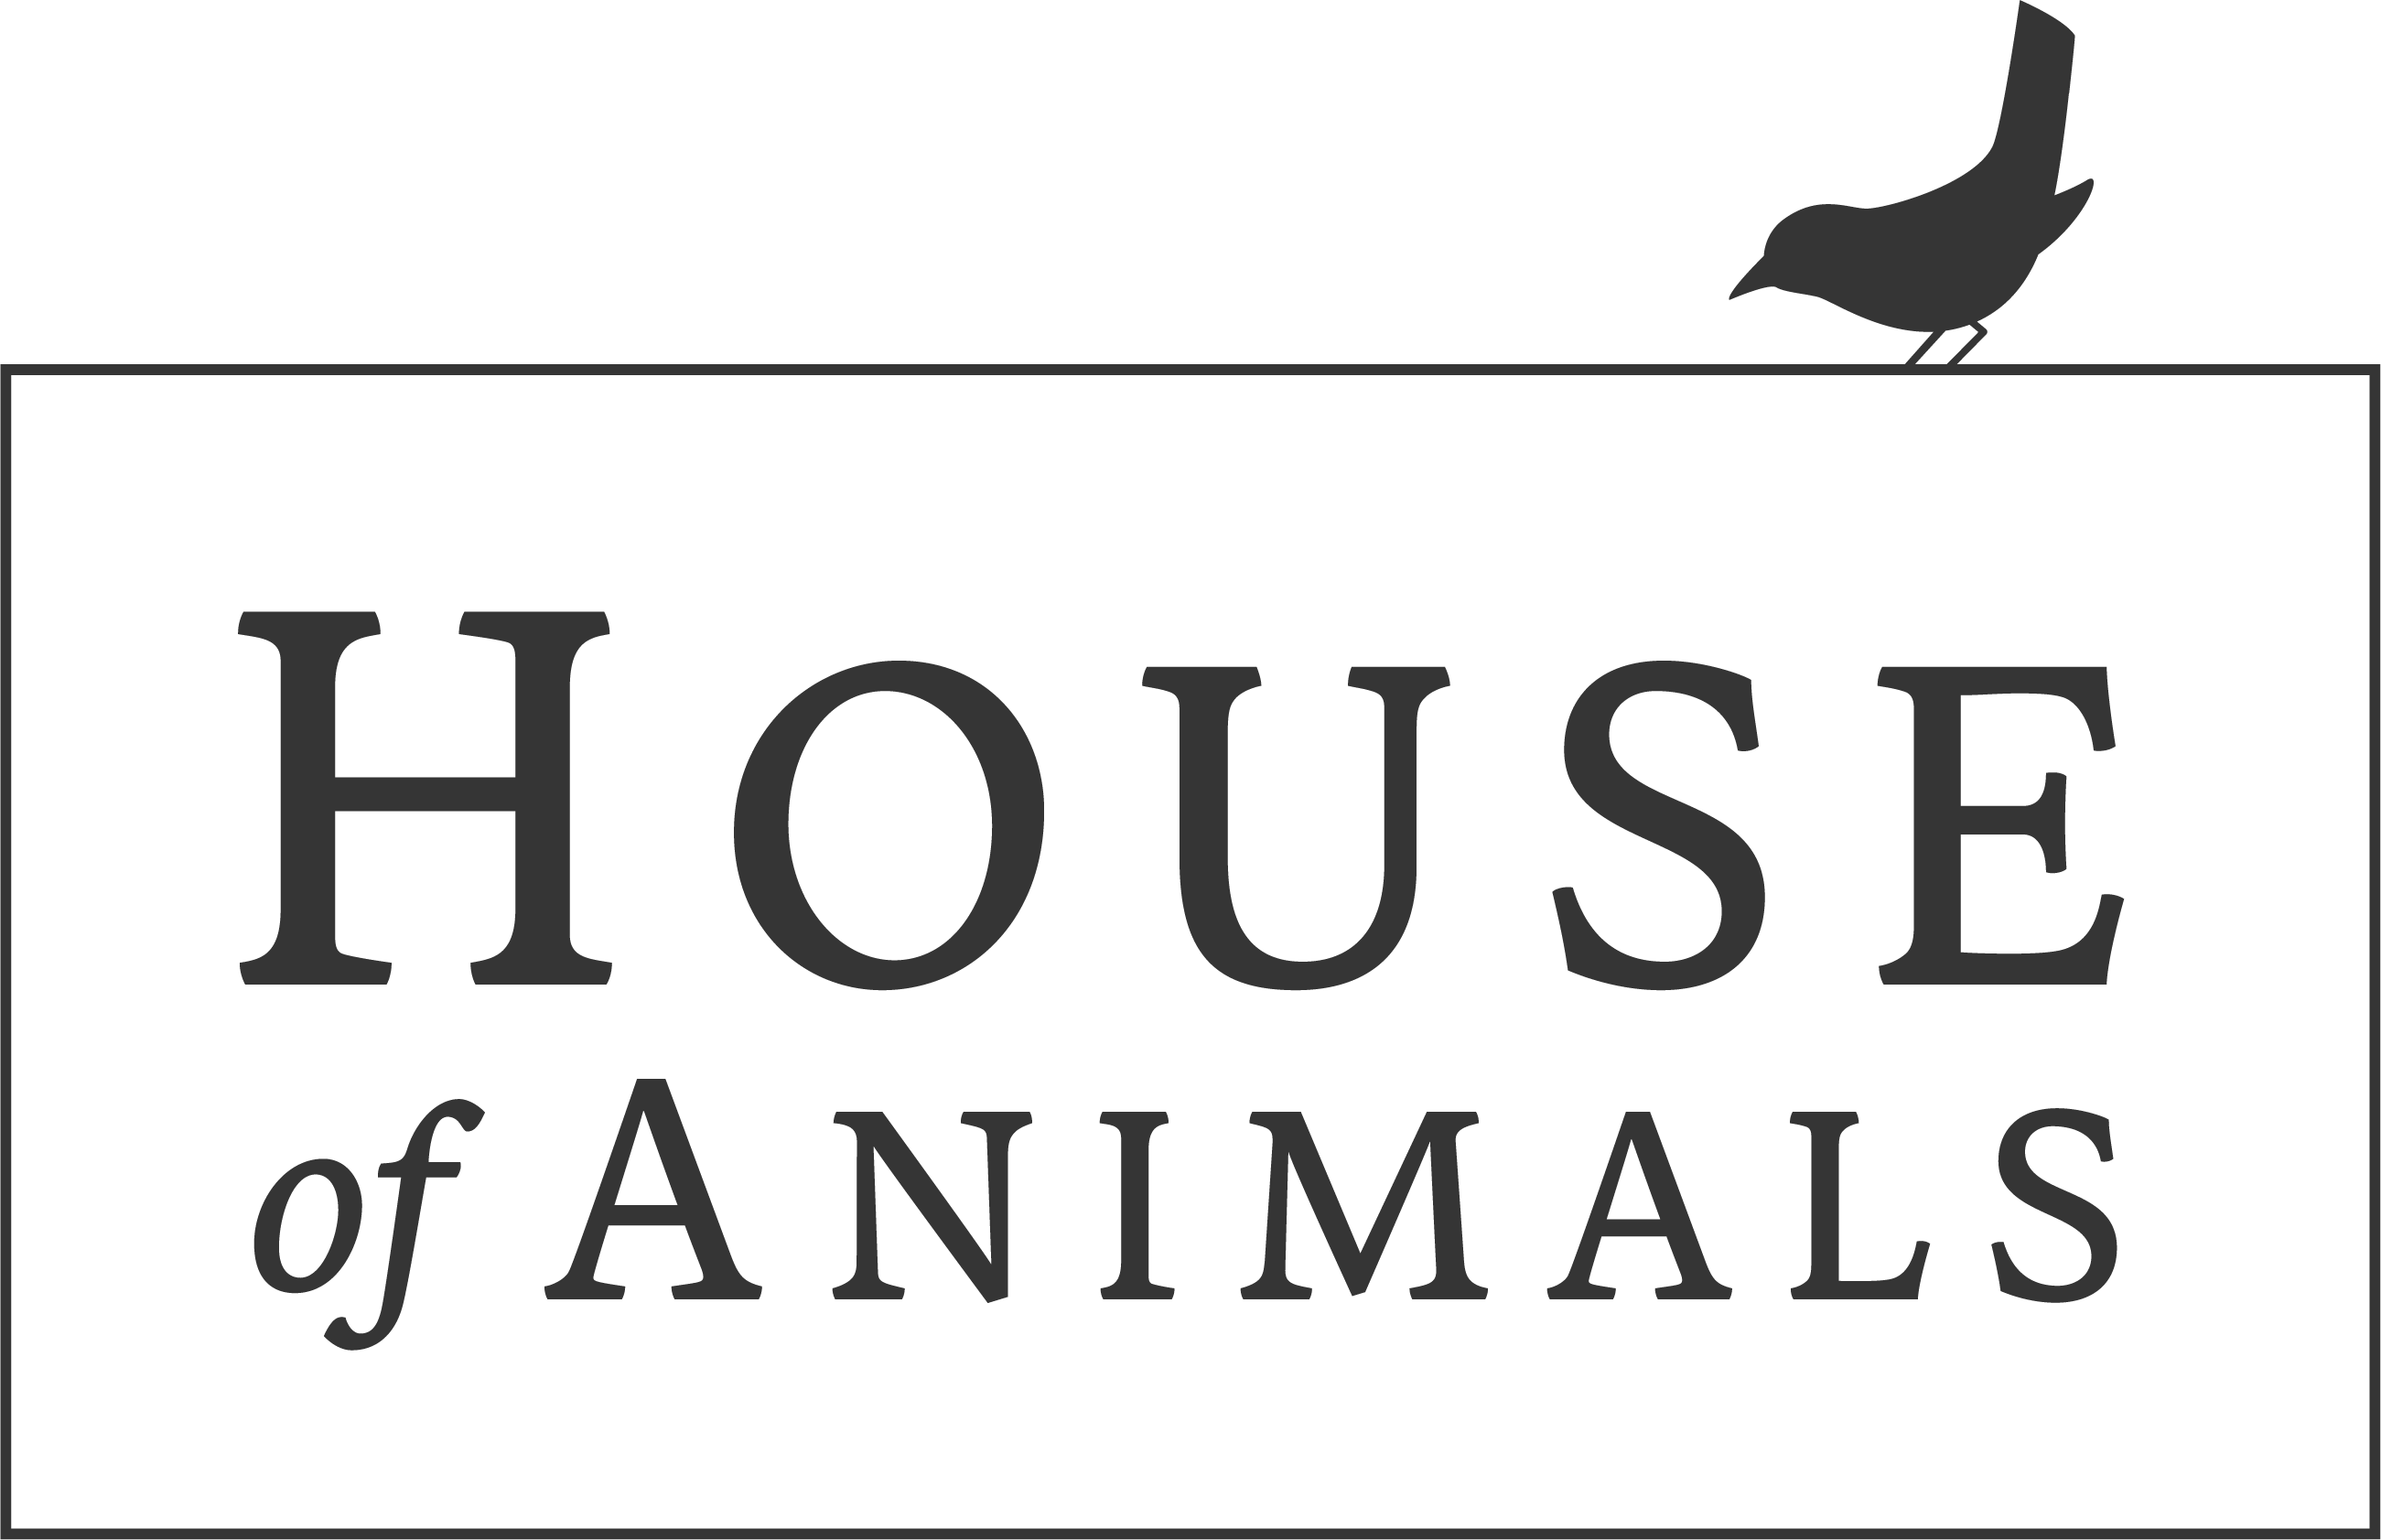 Stichting House of Animals